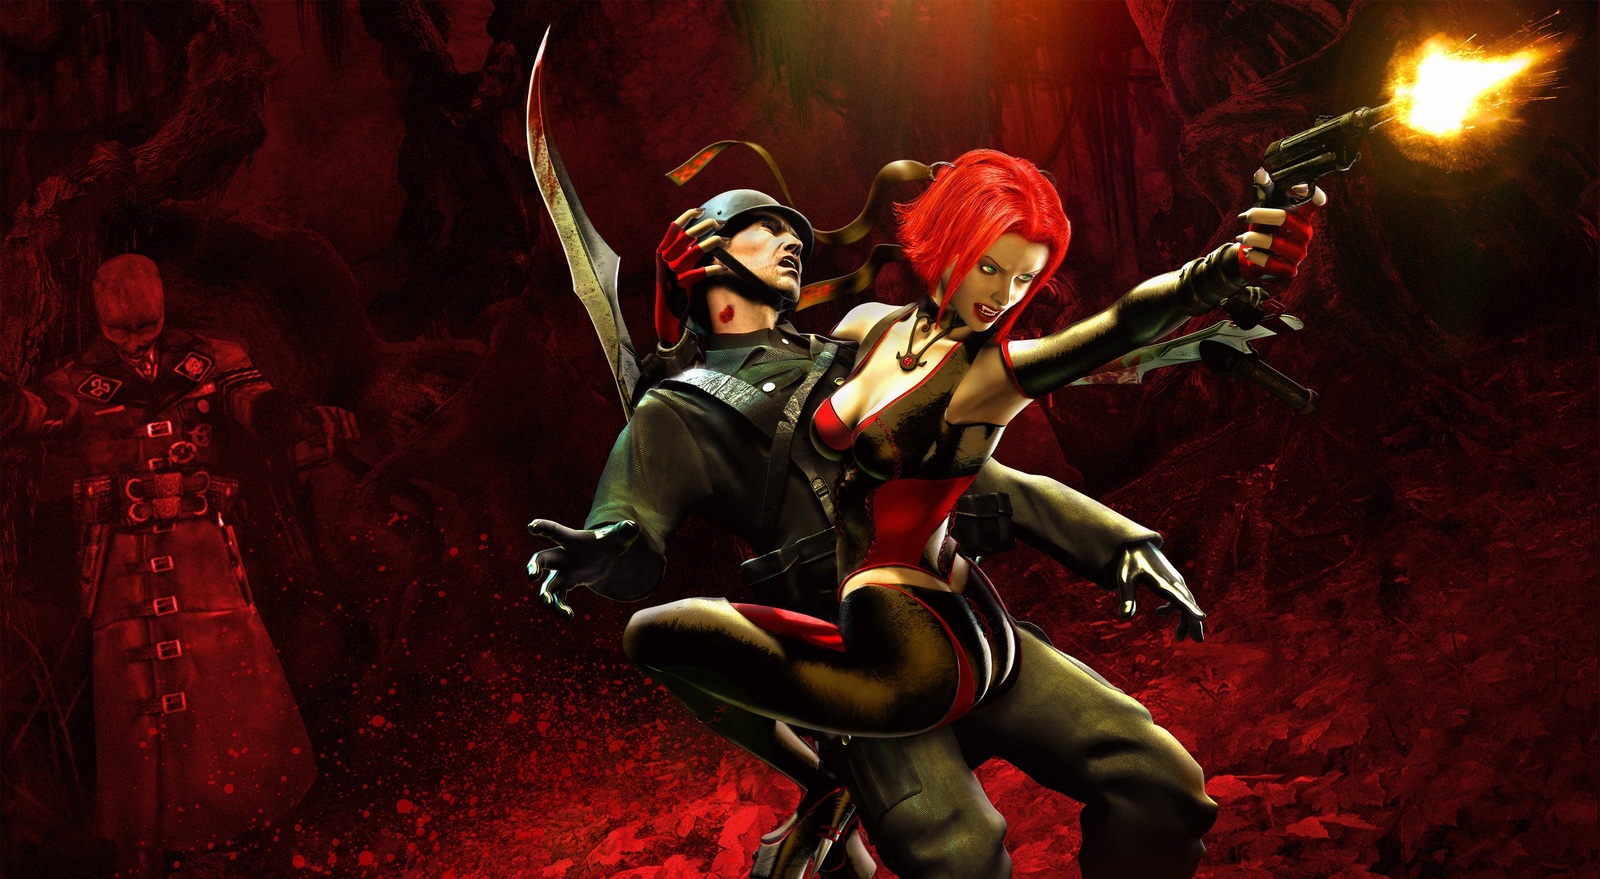 Primary image for BloodRayne Revamped Poster Video Game Art Print Size 11x17" 24x36" 27x40" 32x48"